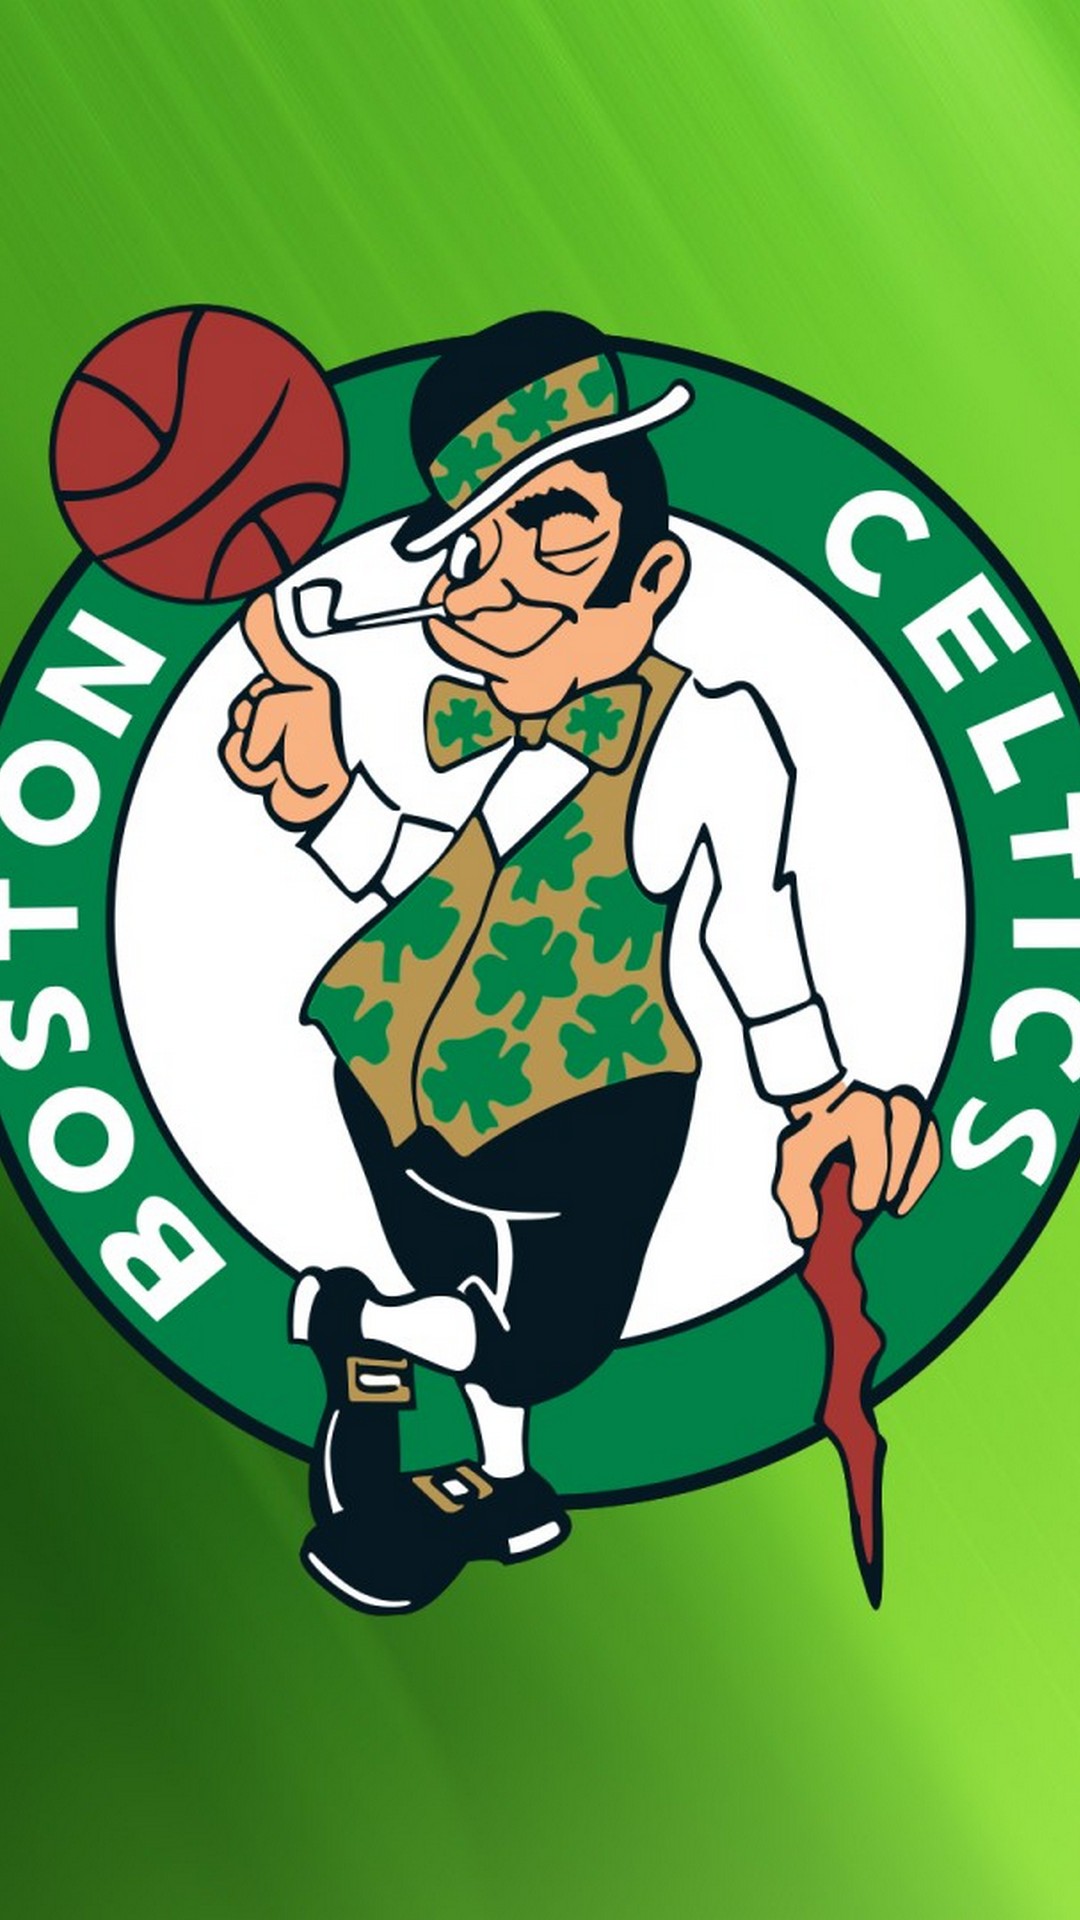 iPhone 7 Wallpaper Boston Celtics with image resolution 1080x1920 pixel. You can make this wallpaper for your iPhone 5, 6, 7, 8, X backgrounds, Mobile Screensaver, or iPad Lock Screen